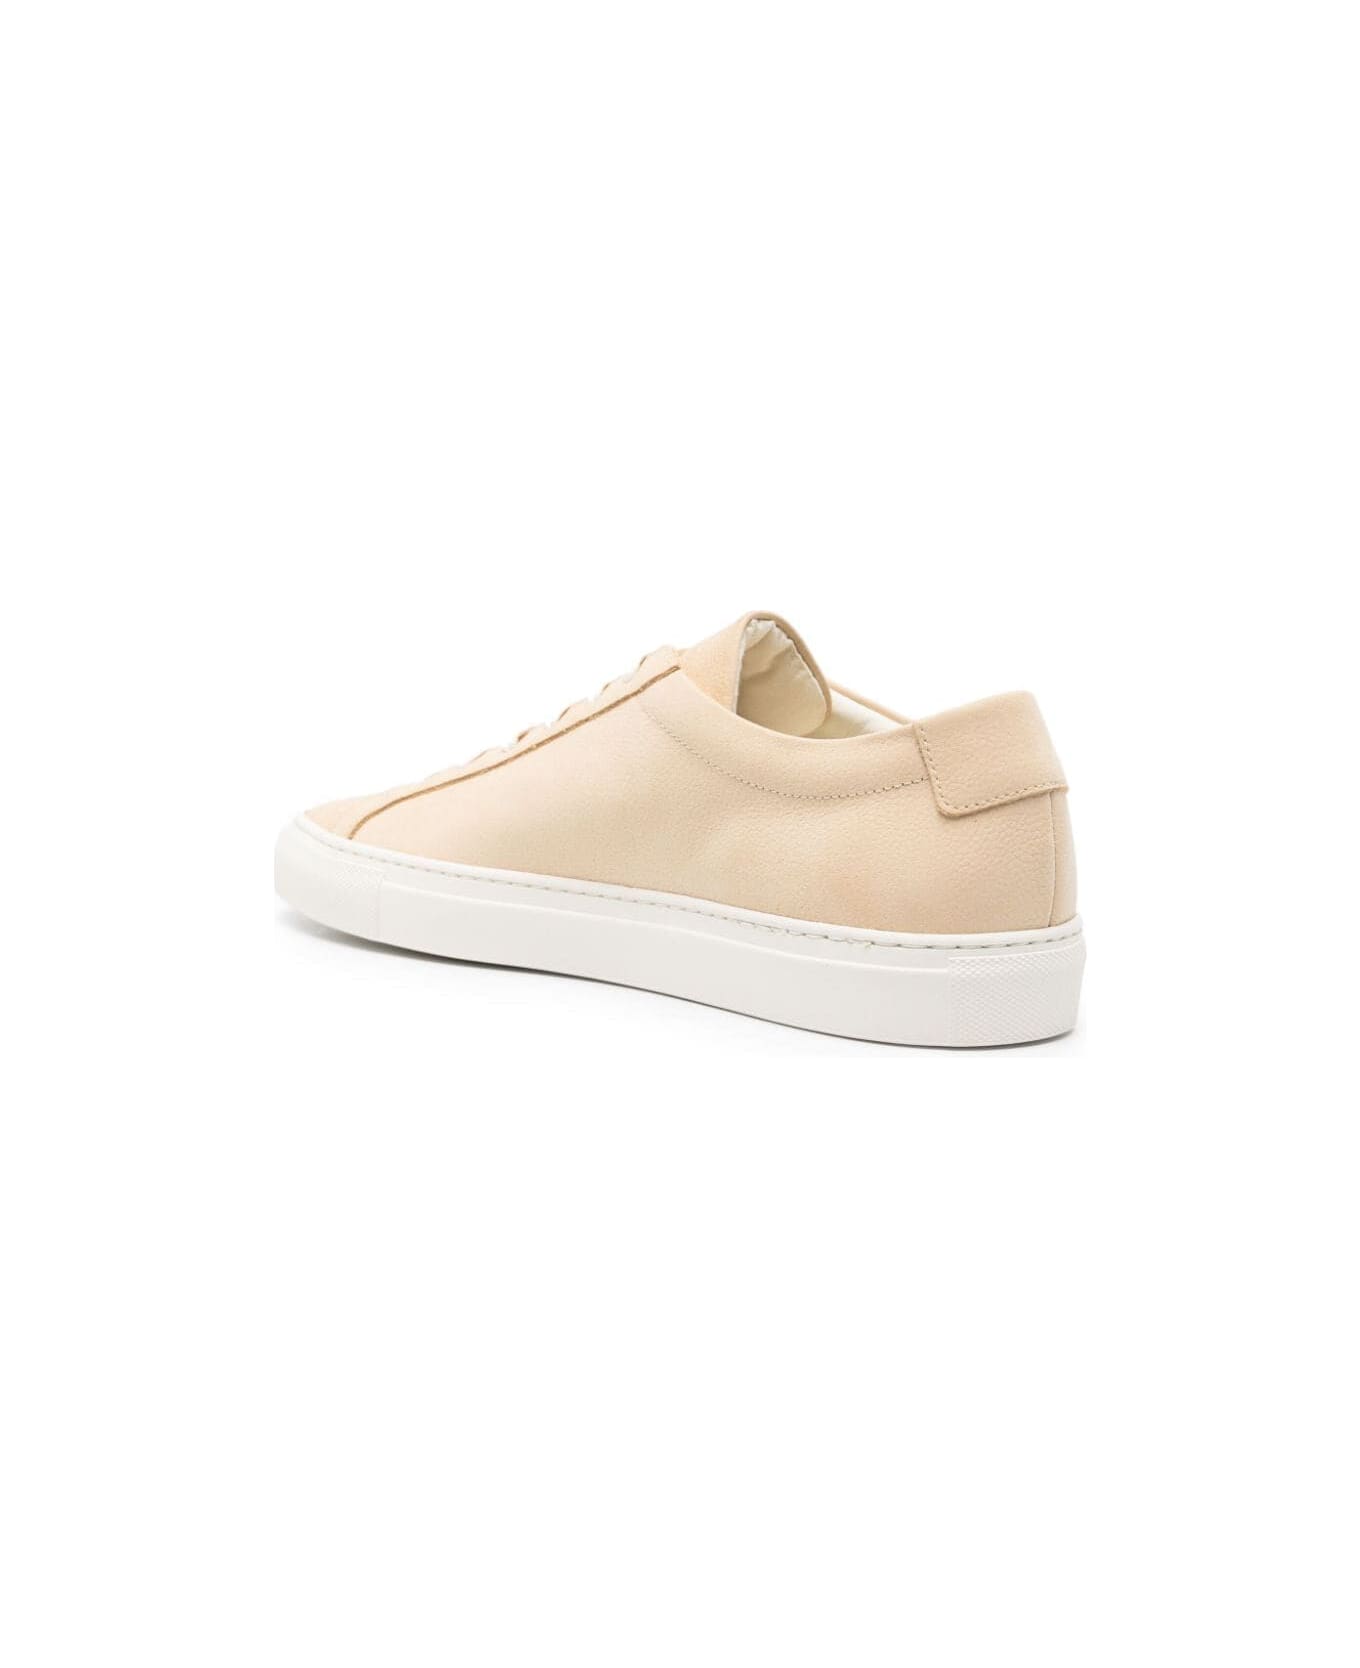 Common Projects Contrast Achilles Sneaker - Tan